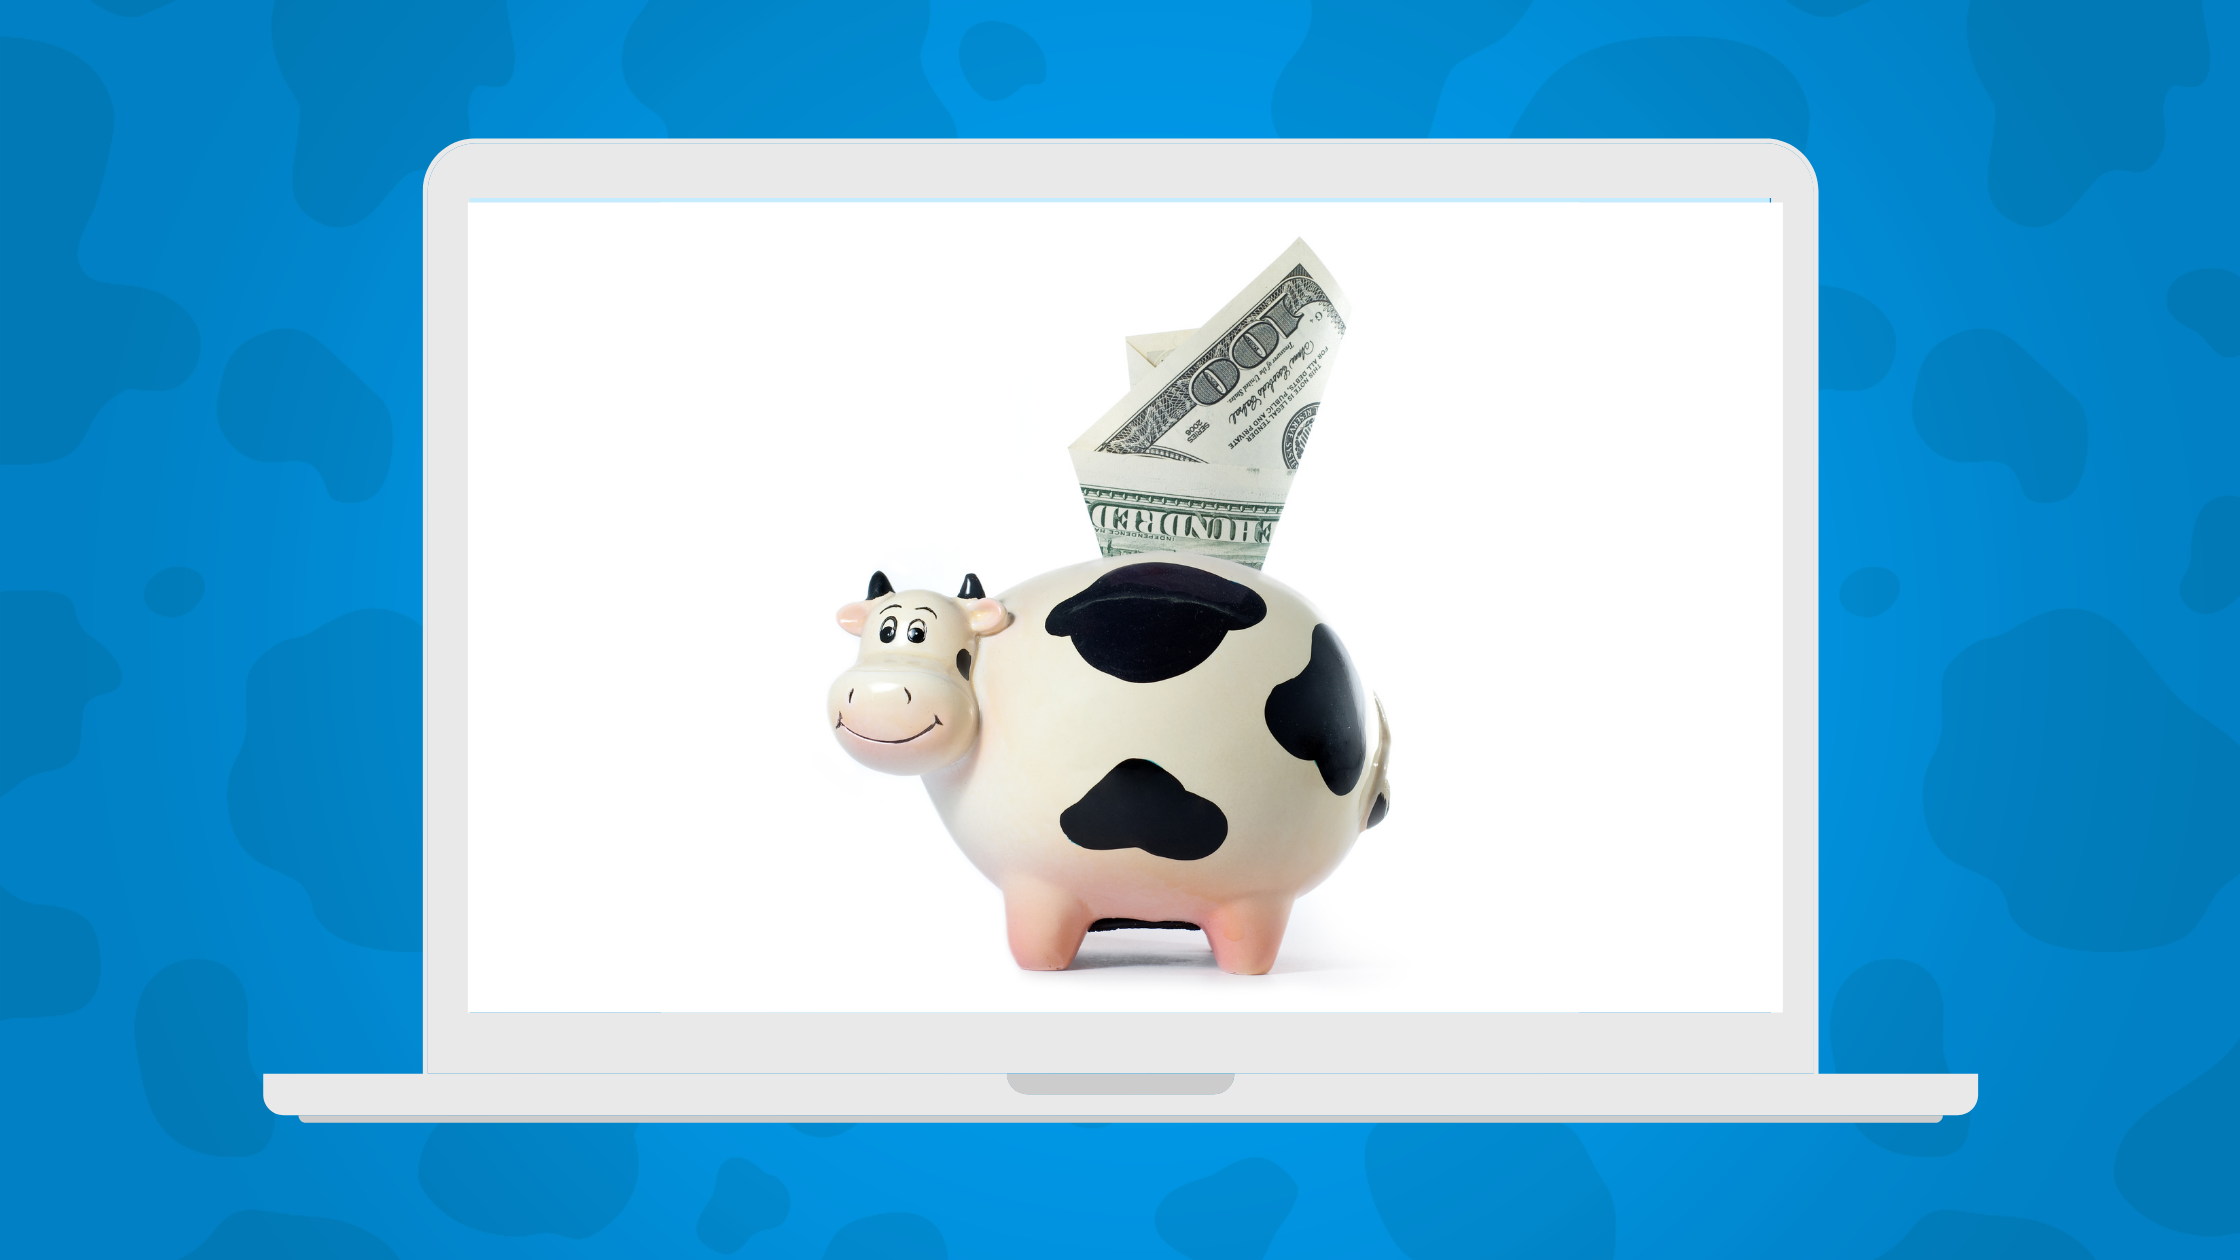 Cow piggy bank with money sticking out on a laptop screen